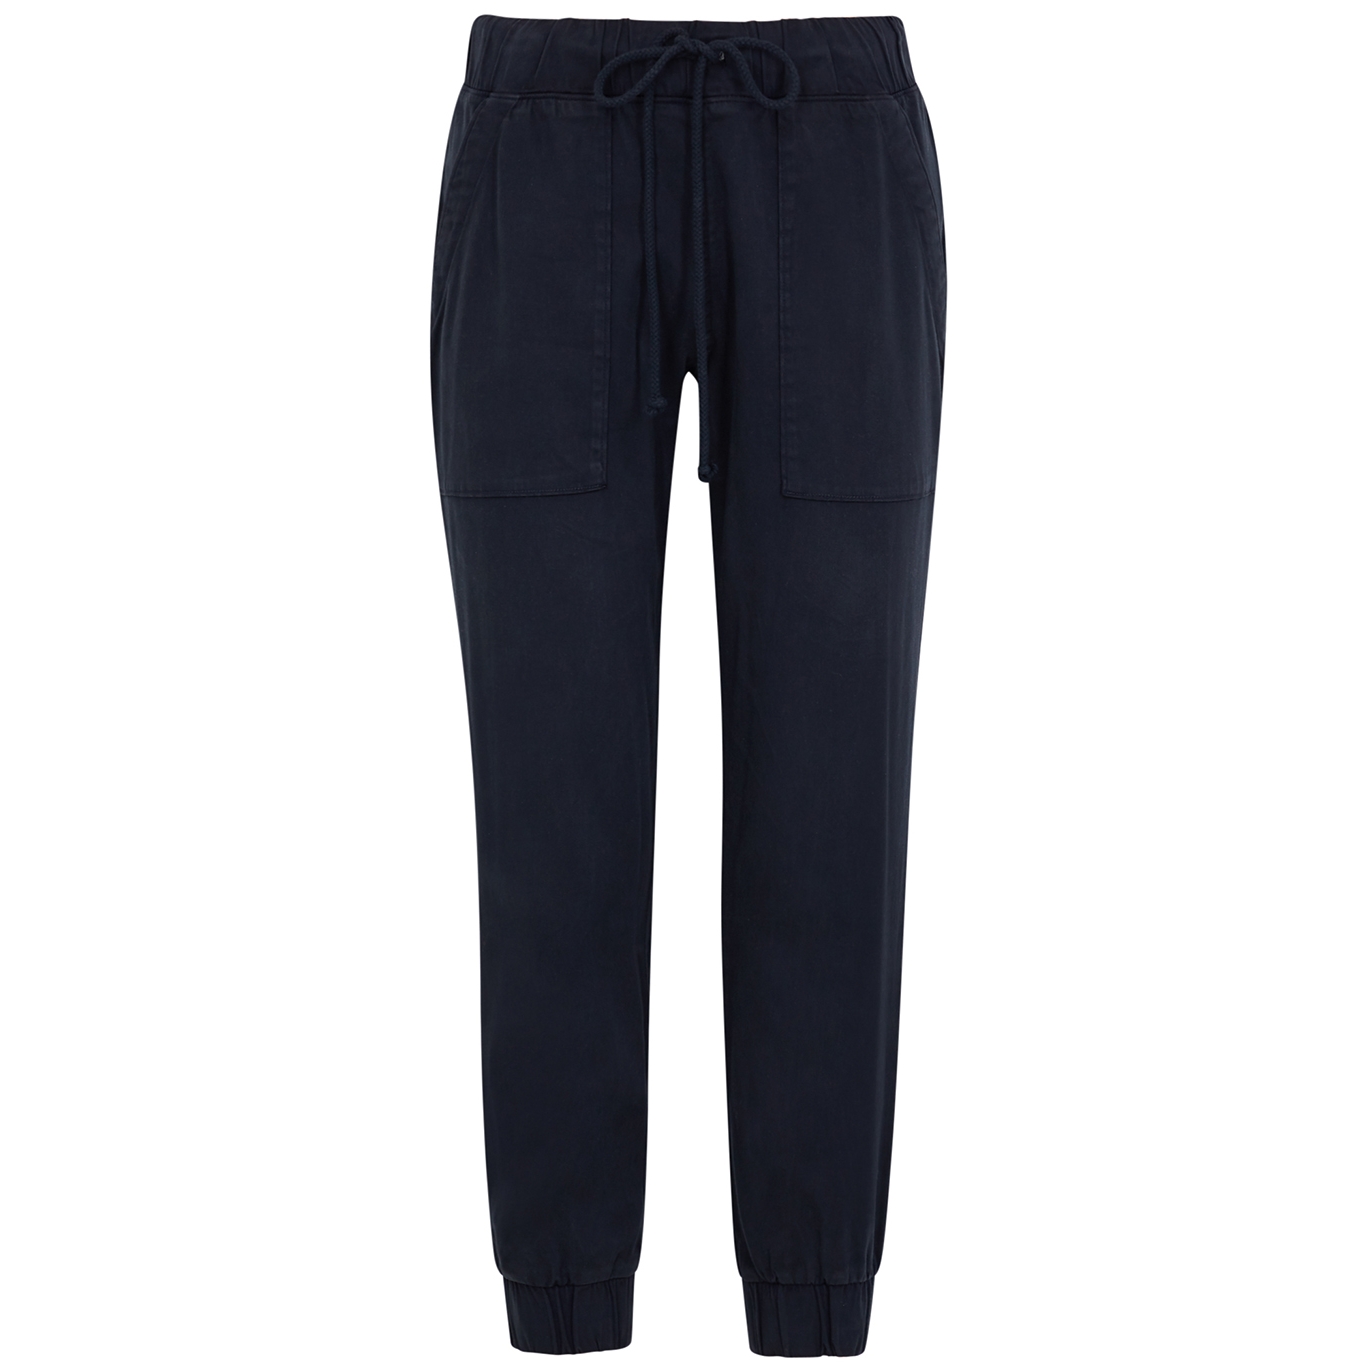 Bella Dahl Navy Brushed Twill Trousers